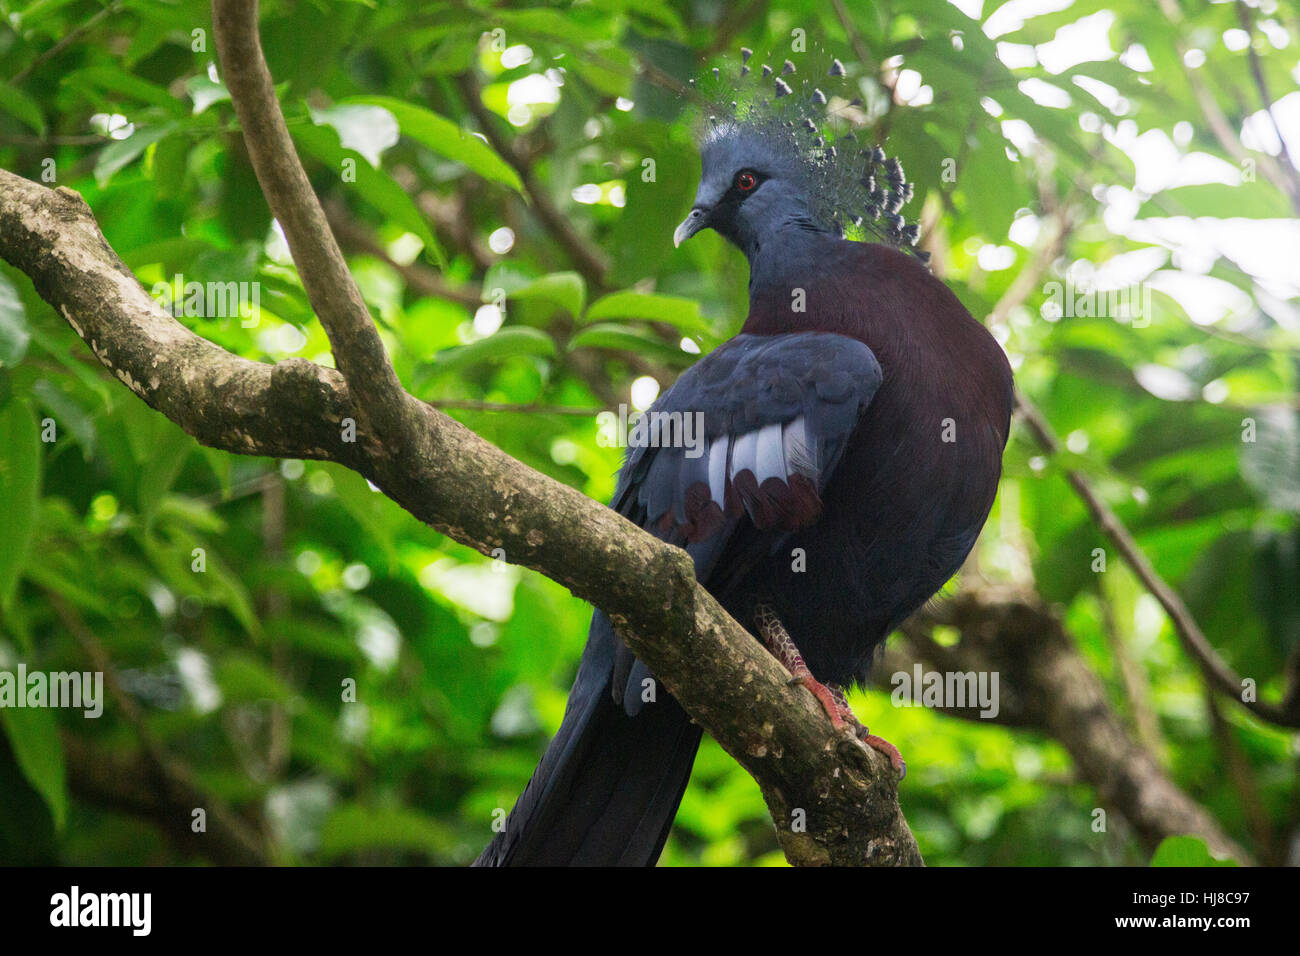 Victoria crowned pigeon - Goura Victoria - is a large blue gray pigeon that lives in the Papua New Guinea region. Stock Photo